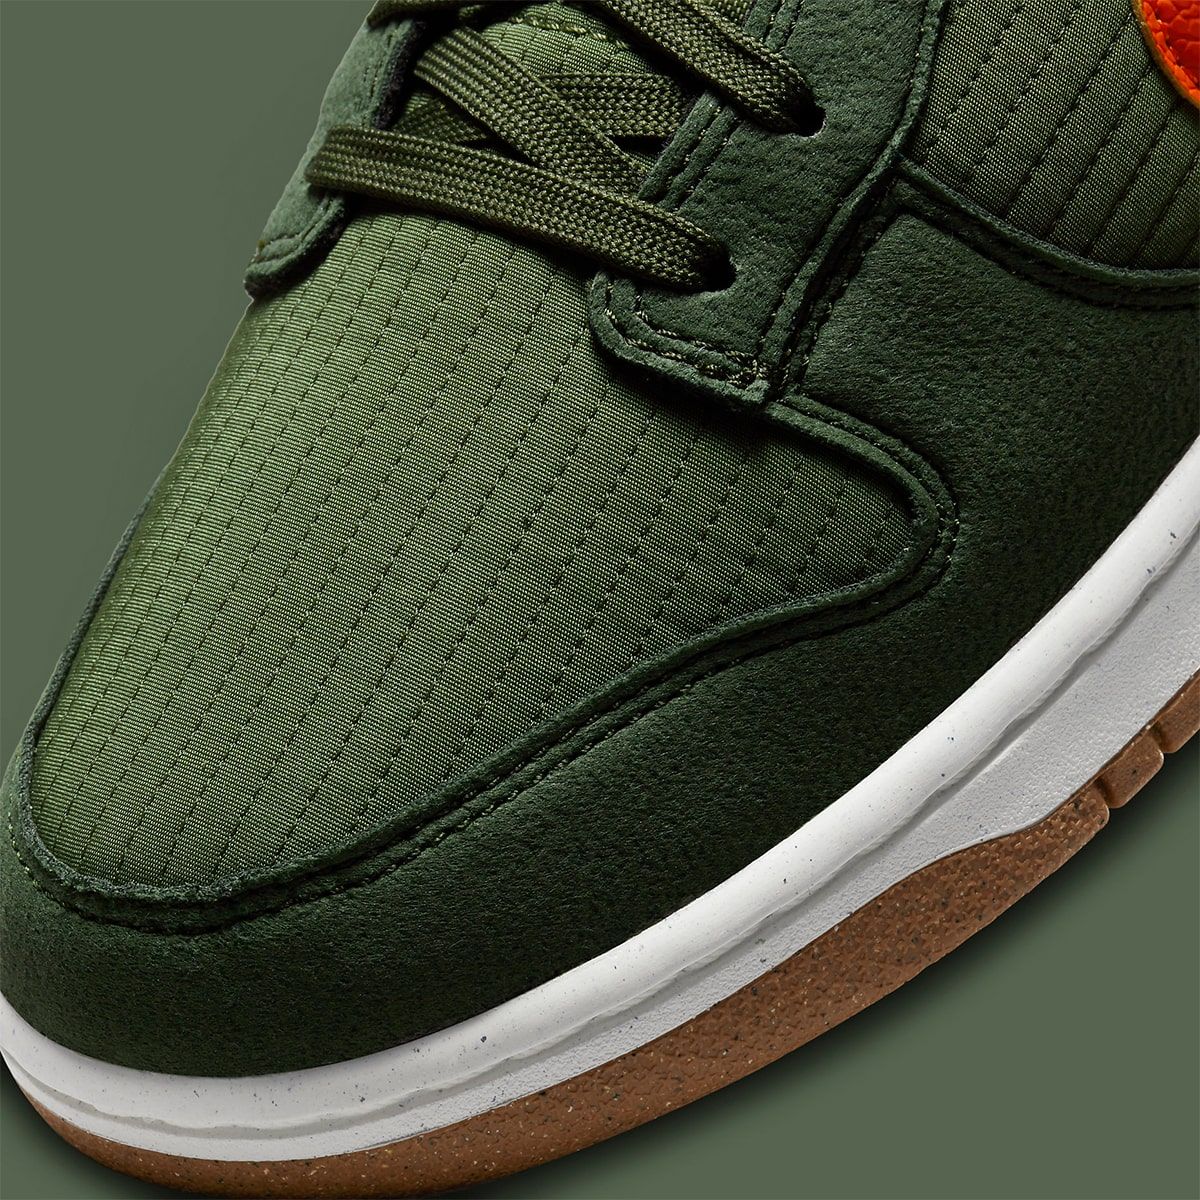 Nike Dunk Low Toasty “Sequoia” Drops May 10th | House of Heat°